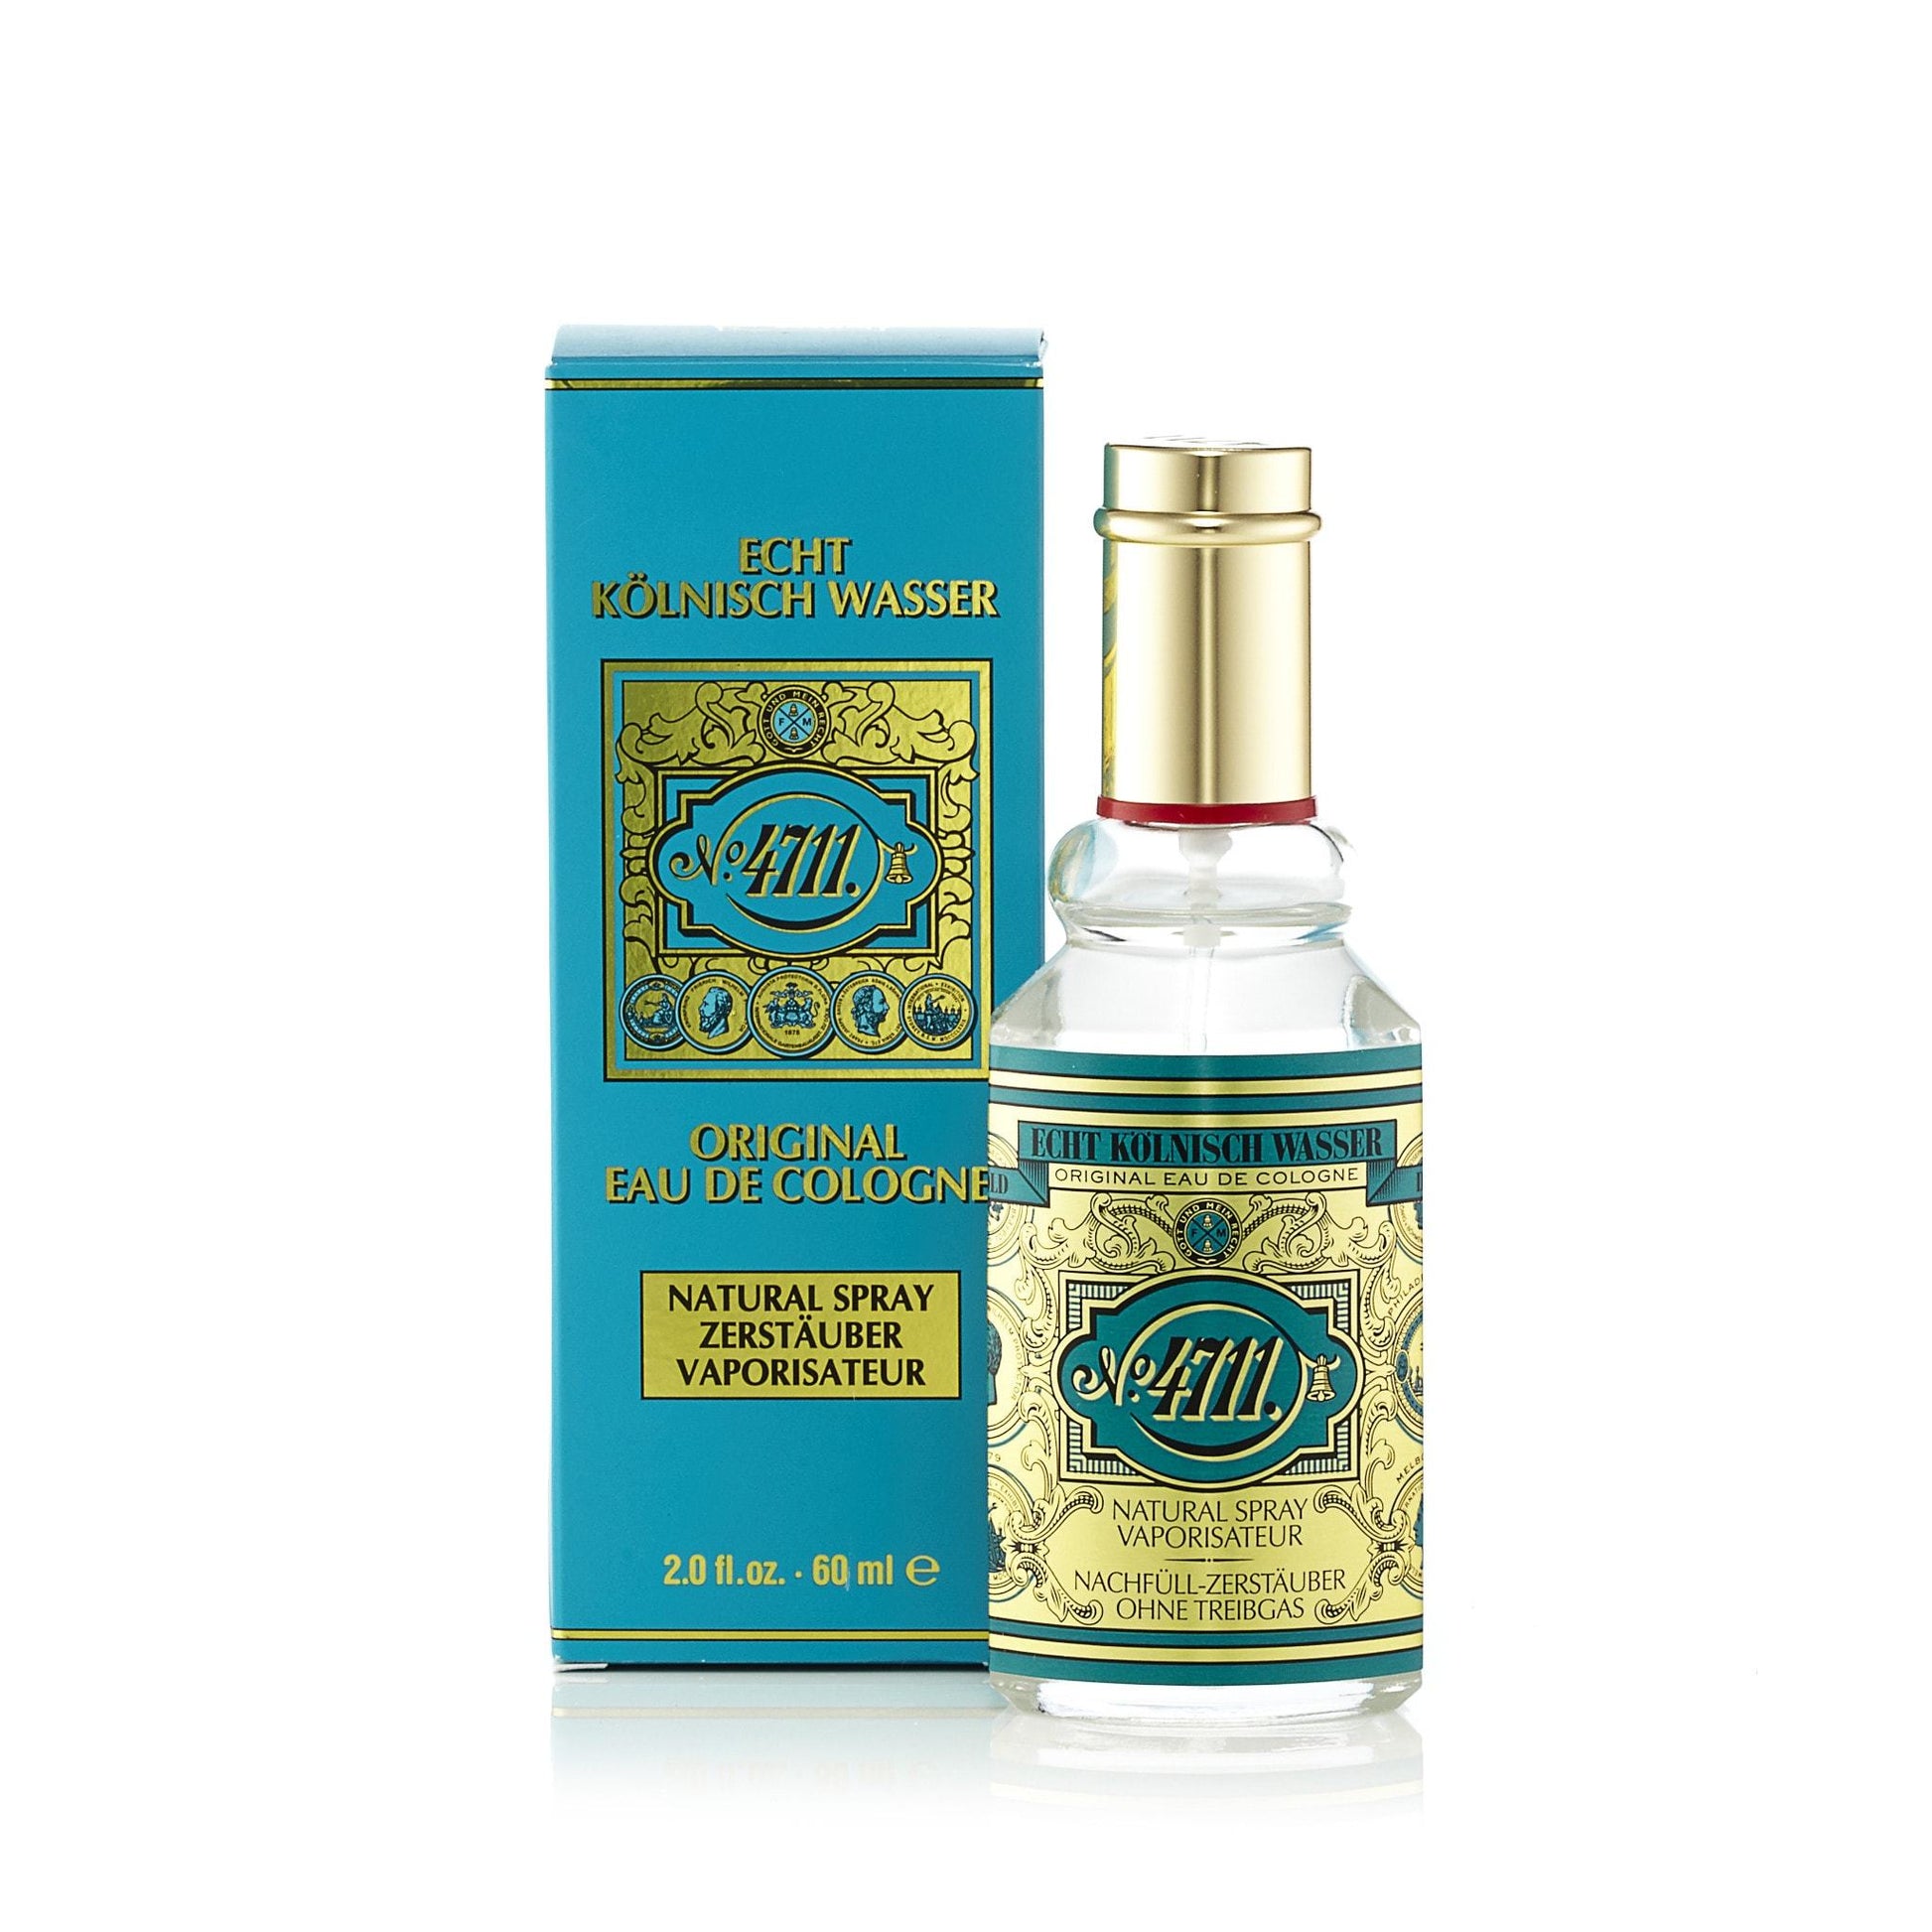 4711 Cologne by 4711, Product image 4